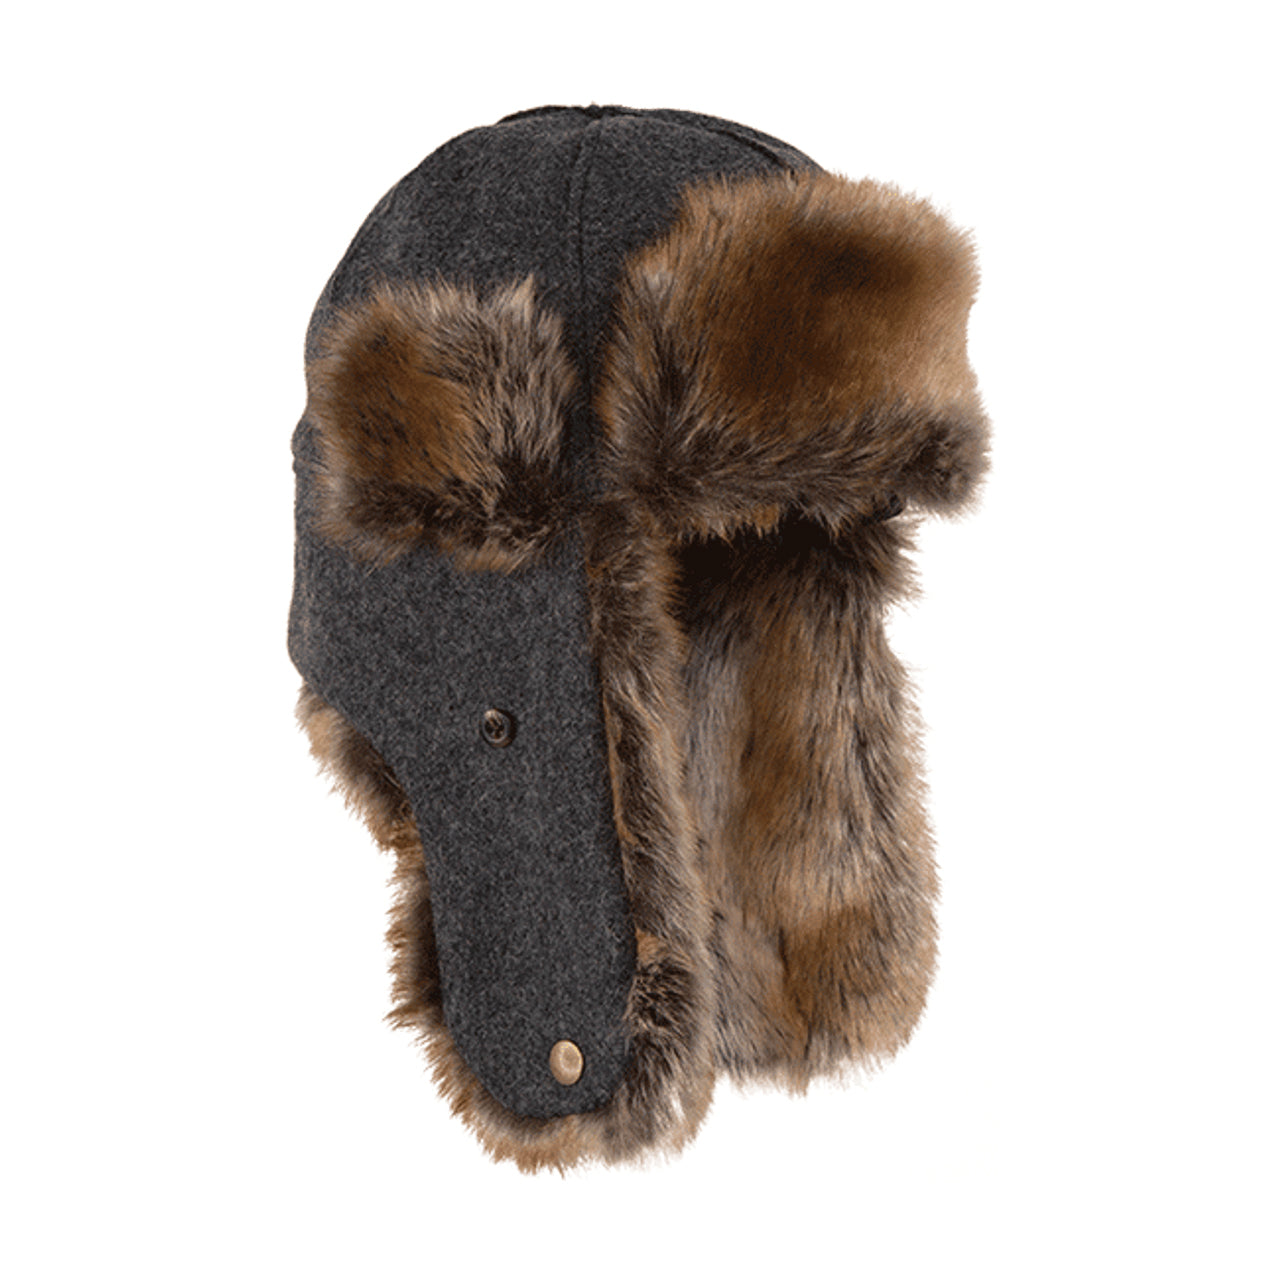 Stormy Kromer The Northwoods Trapper Hat in Charcoal